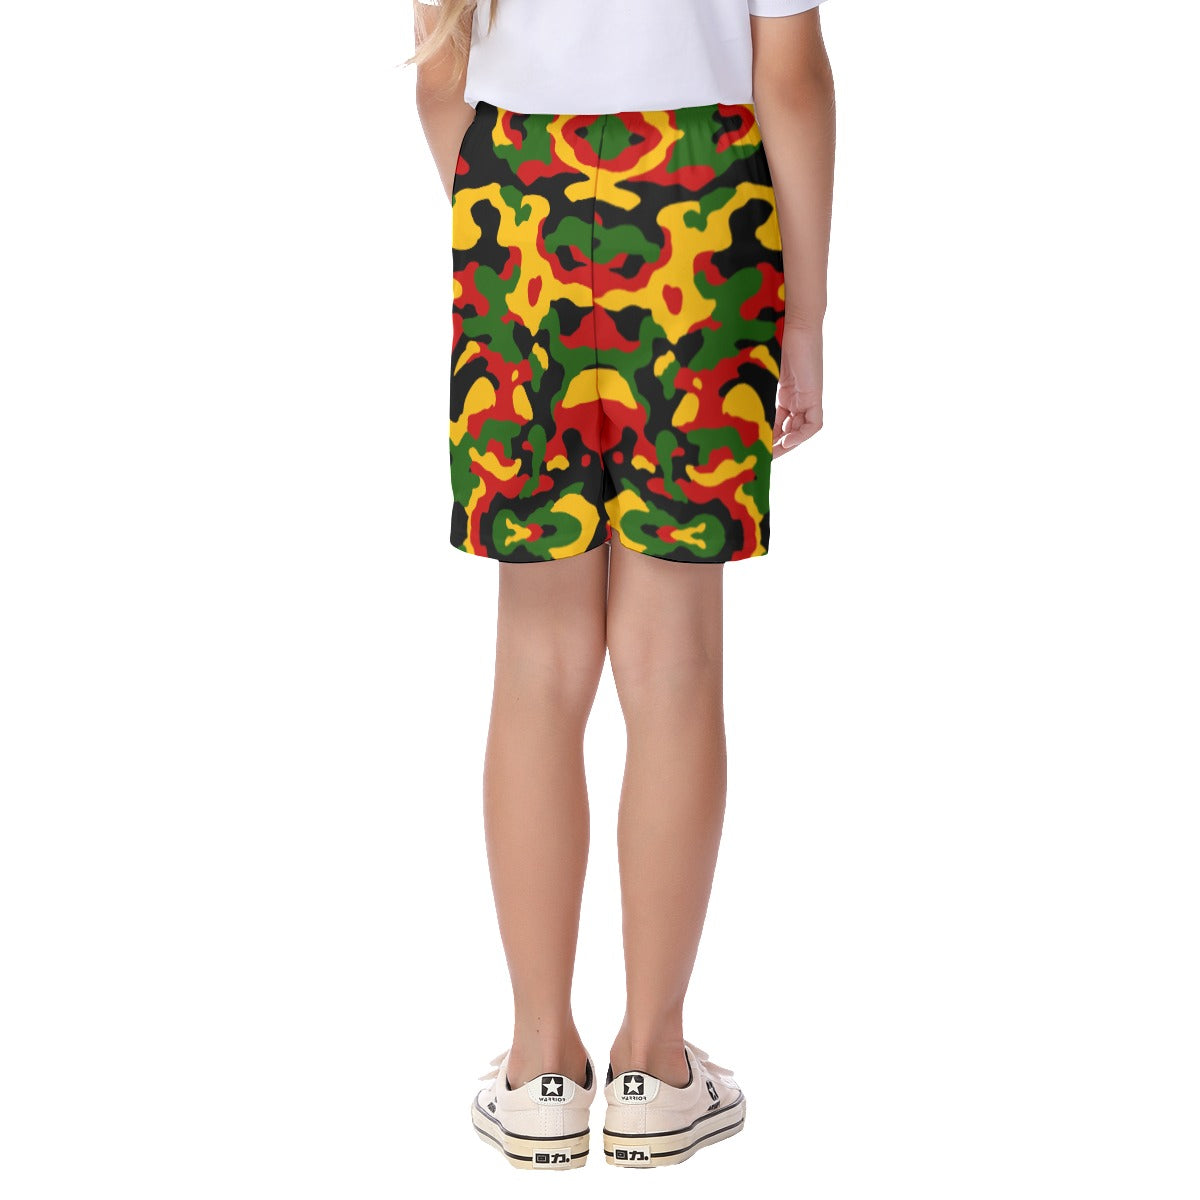 Kids Off The Block Camo Shorts (Afro)